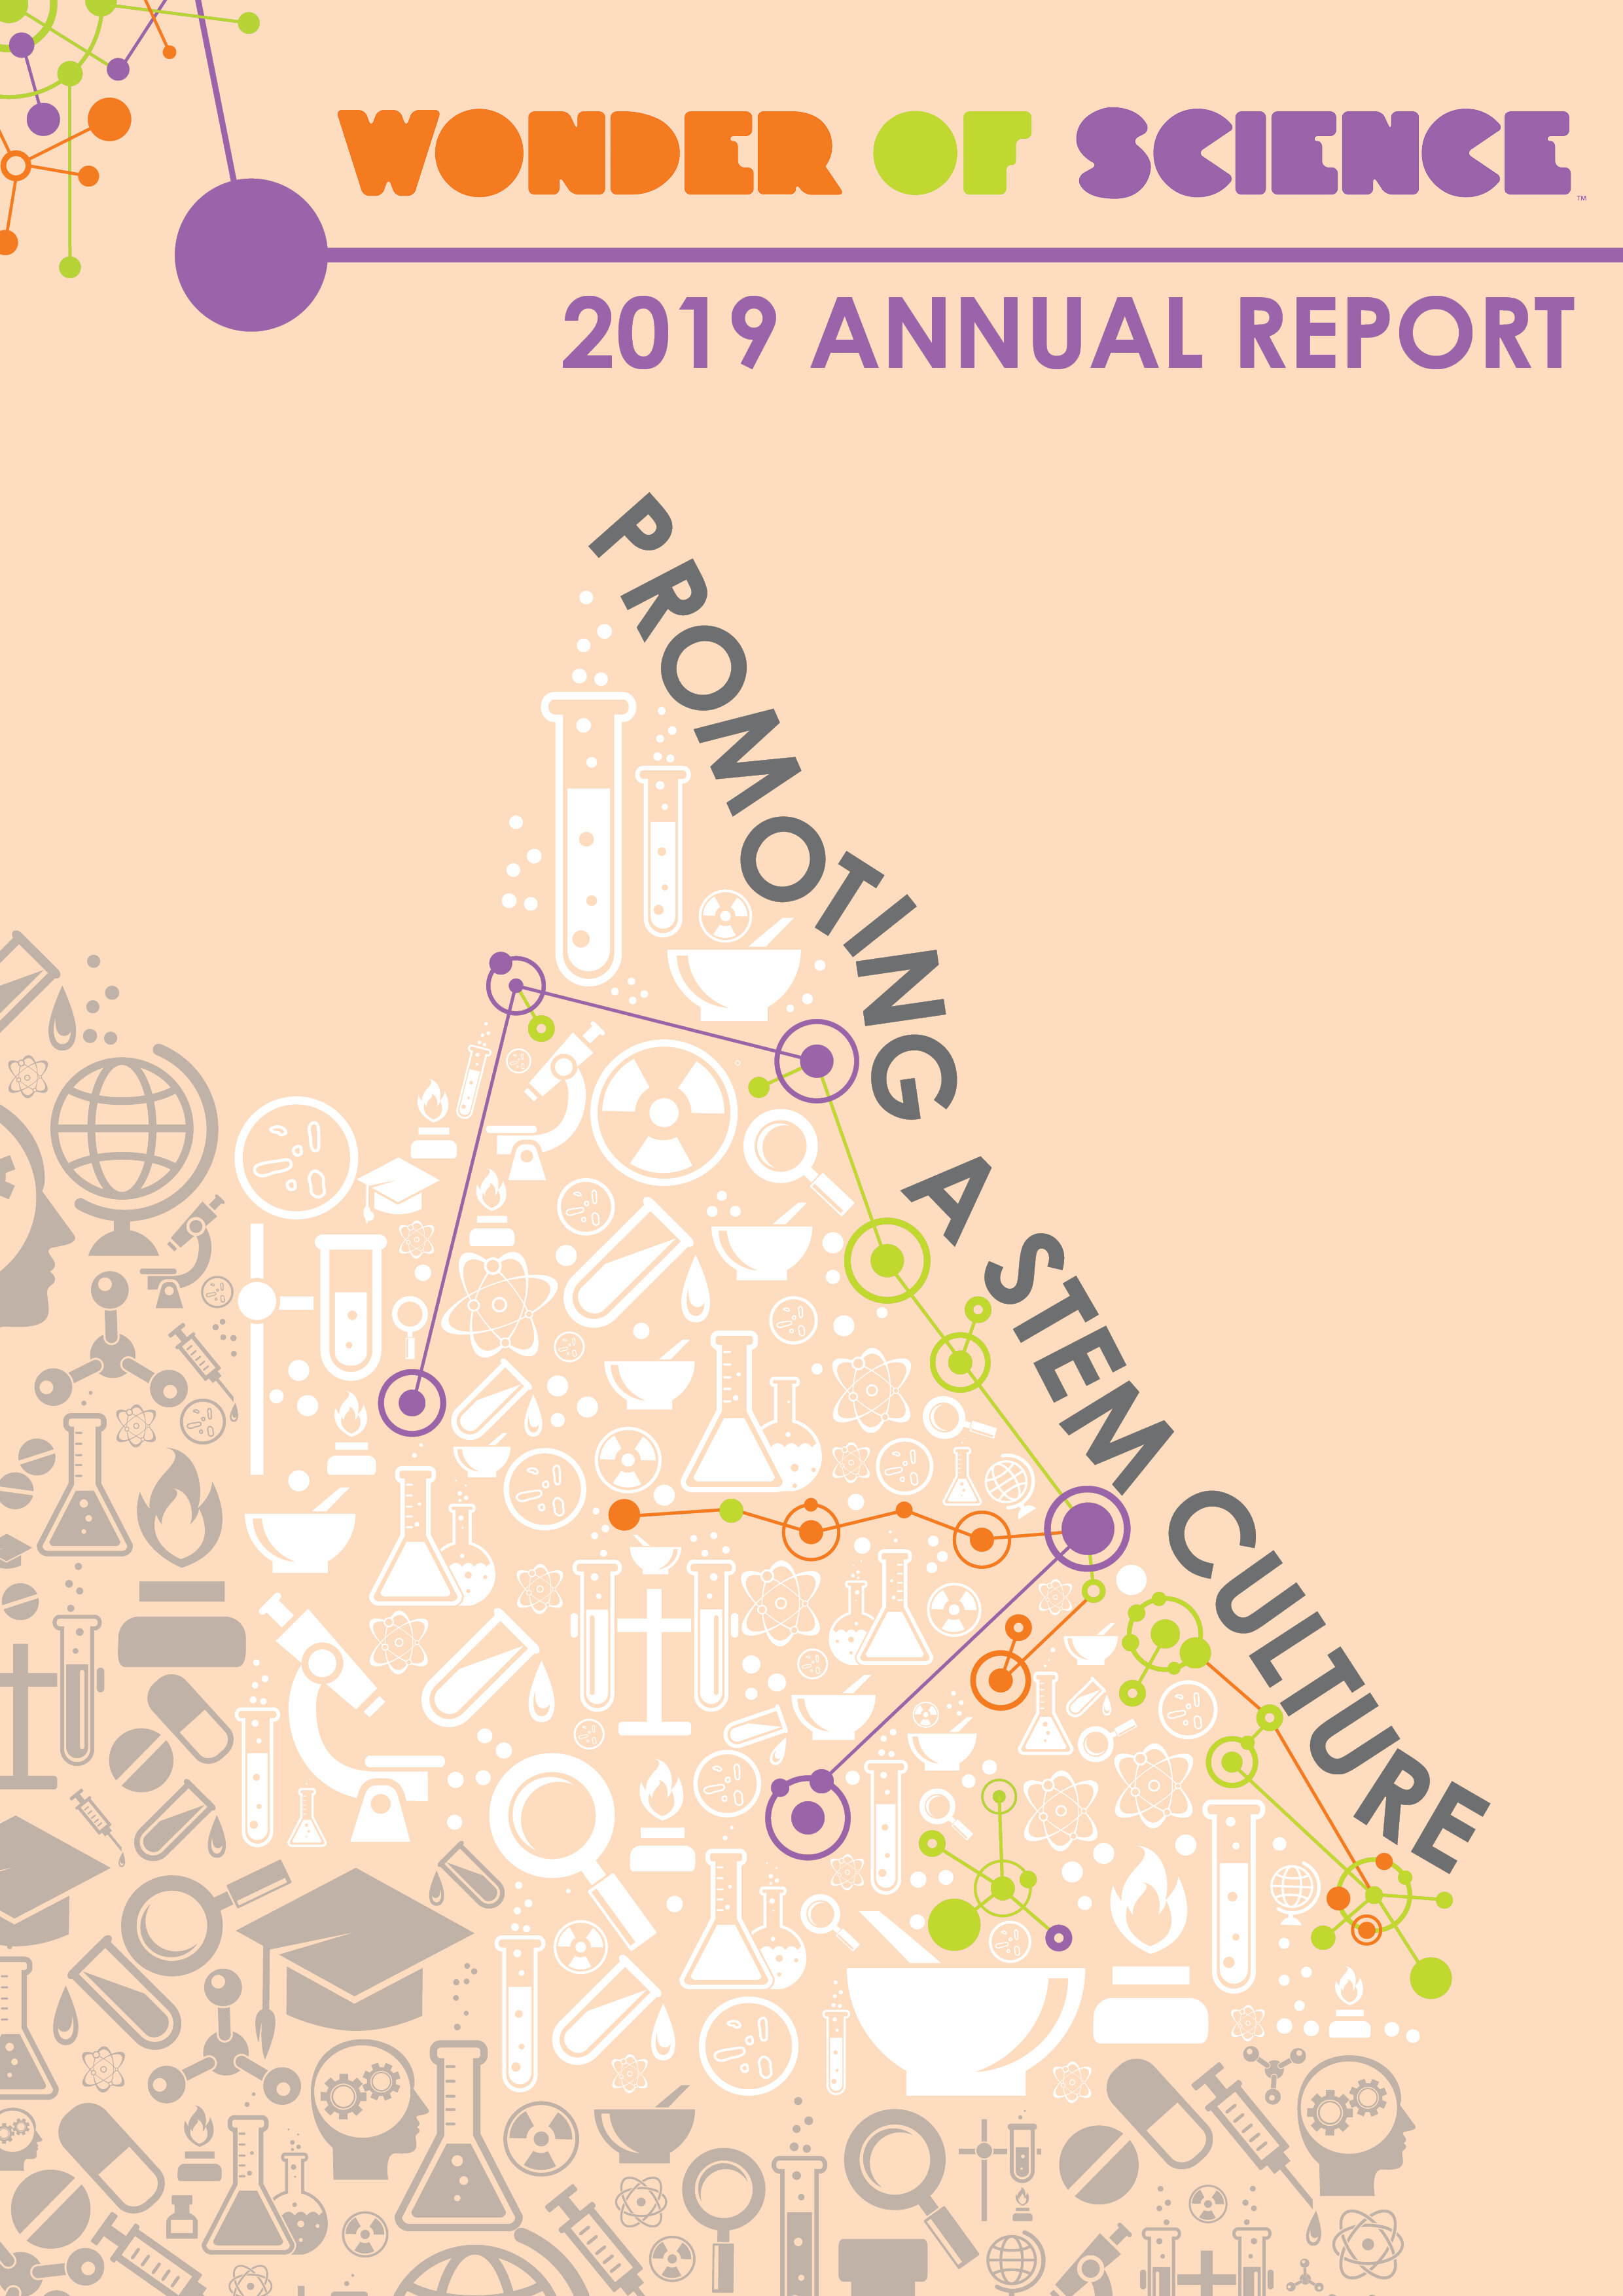 WoS 2019 Annual Report (Copy)